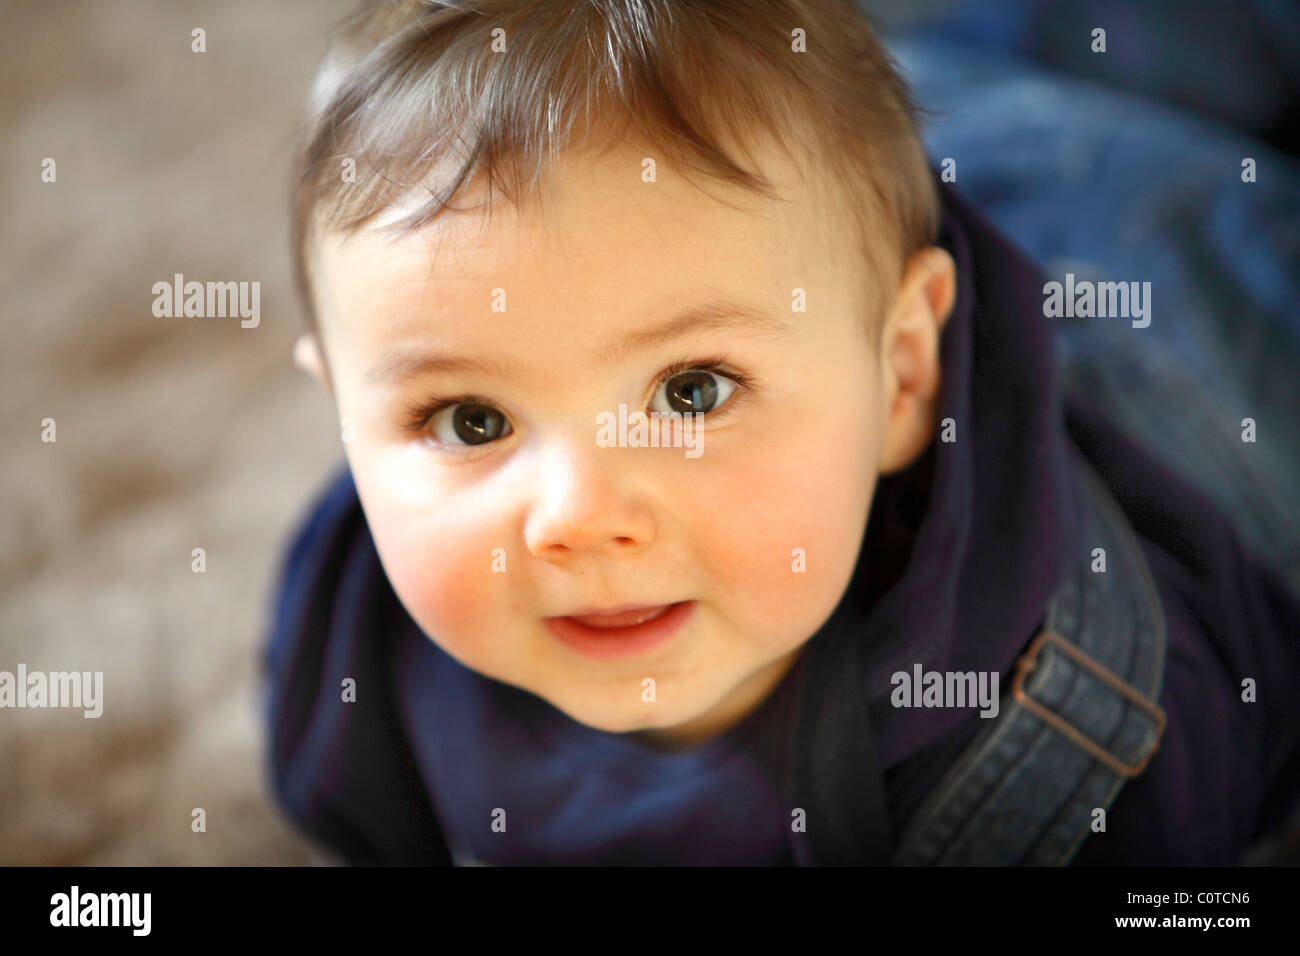 Baby boy, 10 month old, smiling friendly, at home. Stock Photo